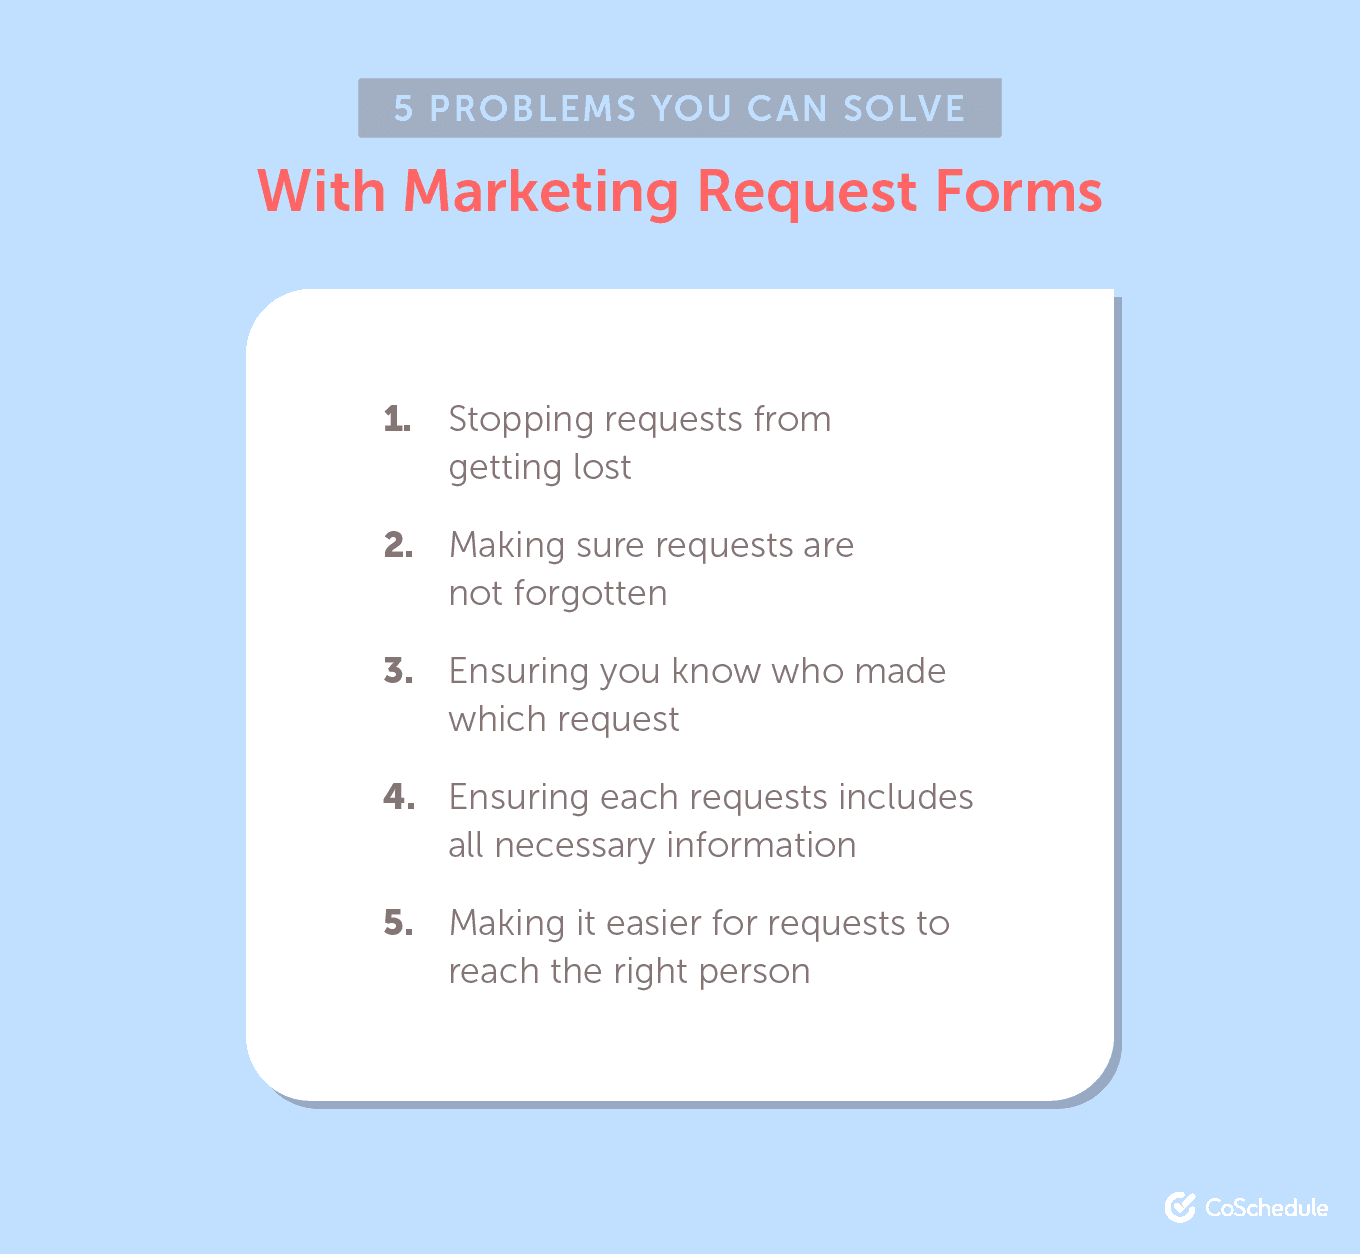 5 Problems You Can Solve With a Marketing Request Form